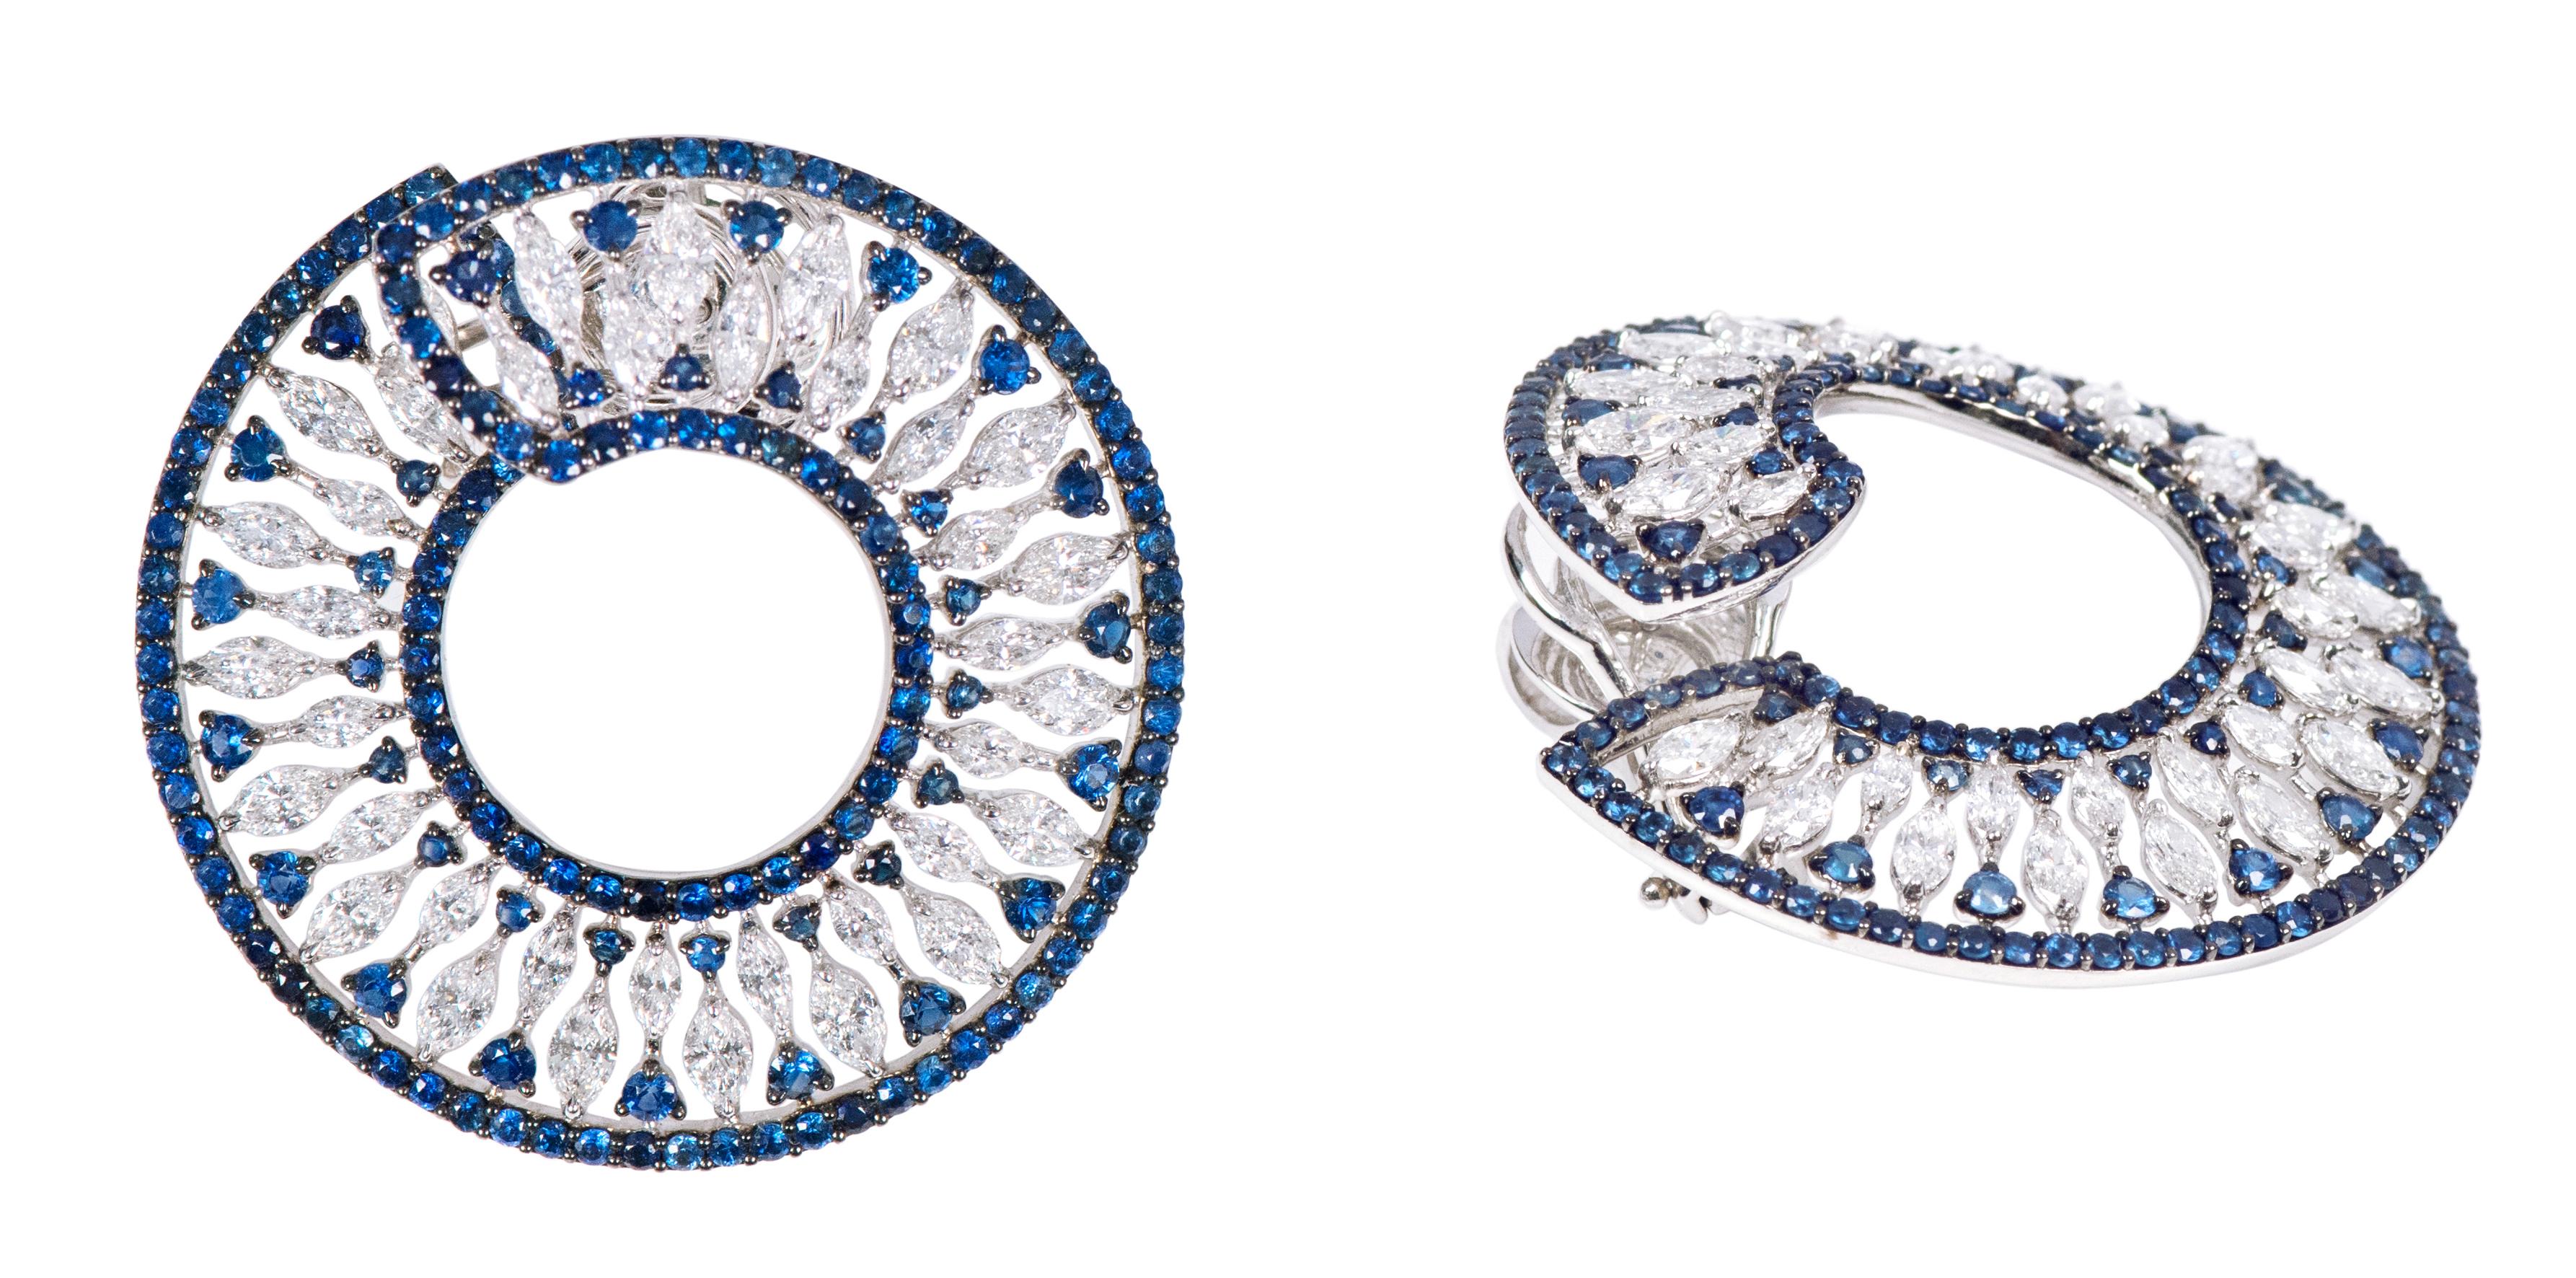 18 Karat White Gold 9.15 Carat Sapphire and Diamond Cocktail Stud Hoop Earrings

This remarkable royal blue sapphire and diamond modern hoop earring is sensational. The round pave set sapphires form the inner and outer layer of this contemporary